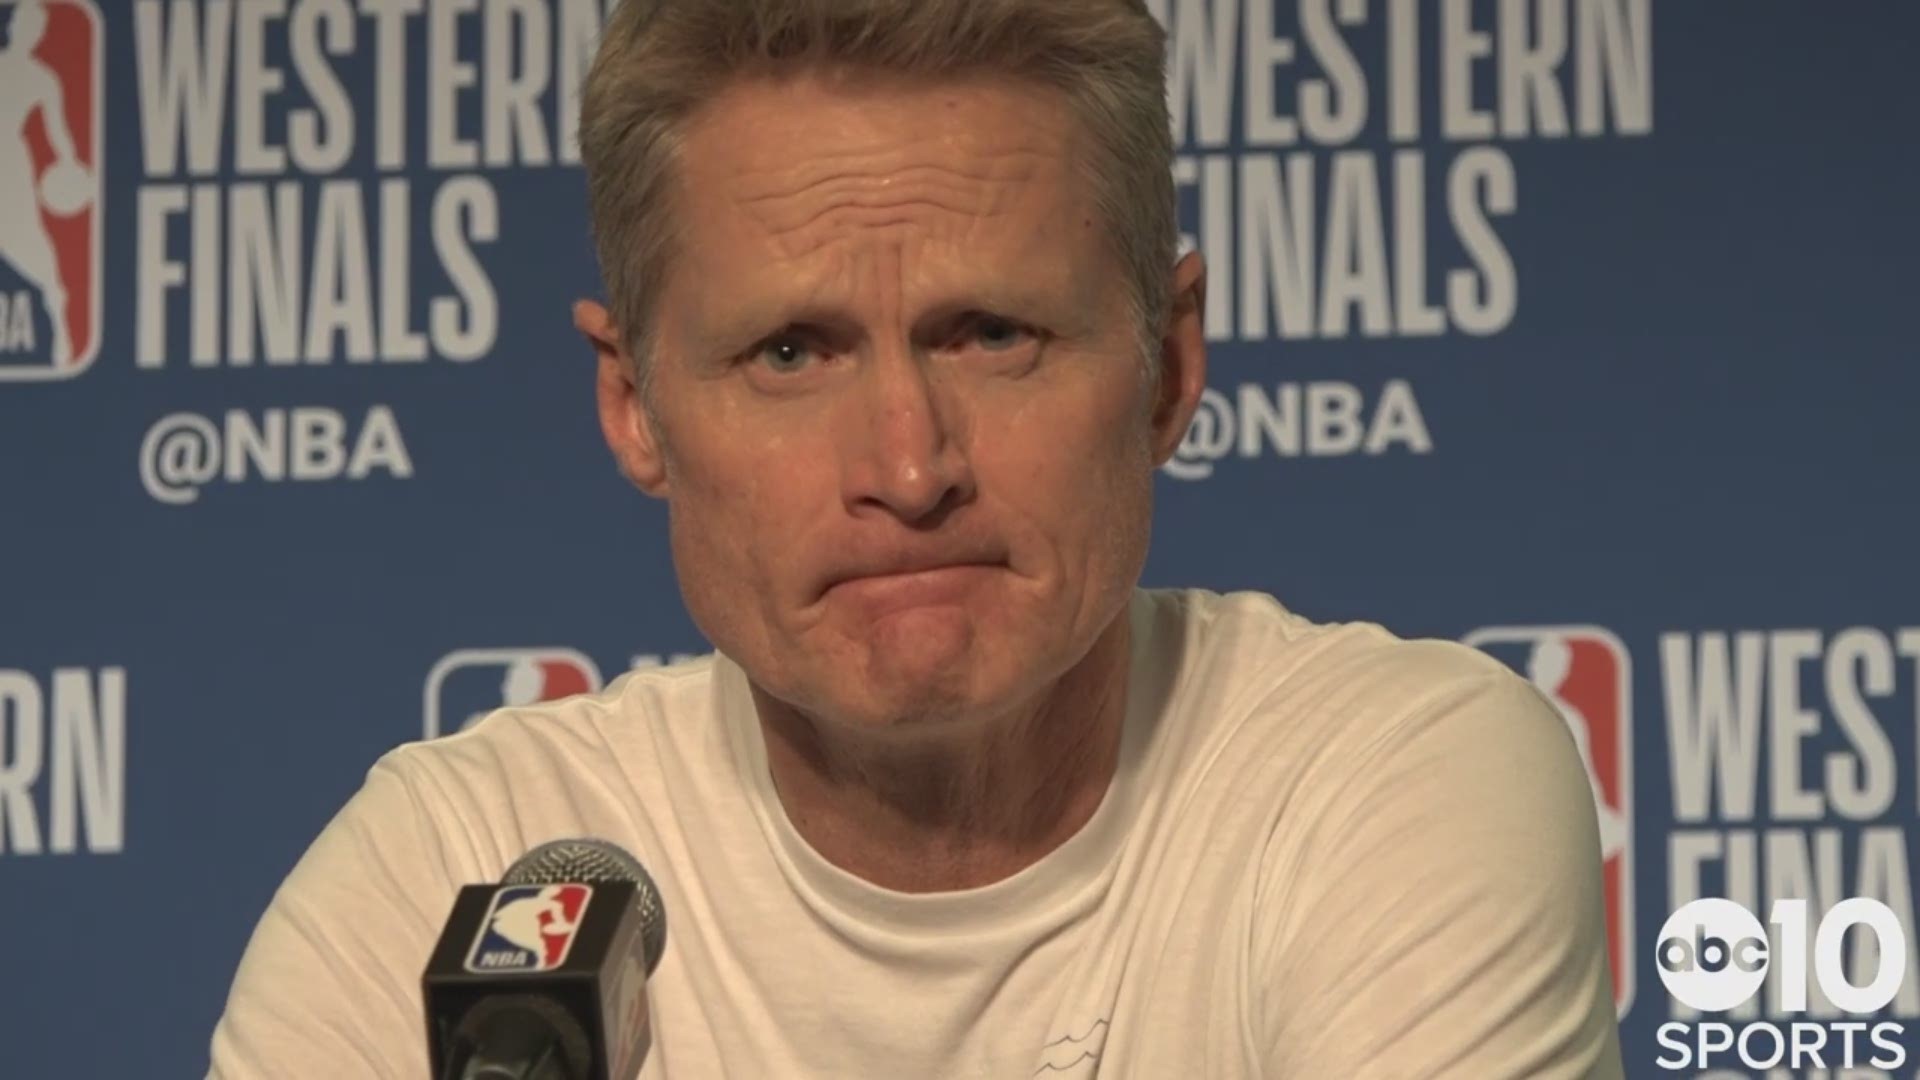 Warriors head coach Steve Kerr talks about Tuesday's 116-94 win in Game 1 of the Western Conference Finals over the Portland Trail Blazers, the performance from Stephen Curry and playing deeper into his bench in this series compared to the Houston series.